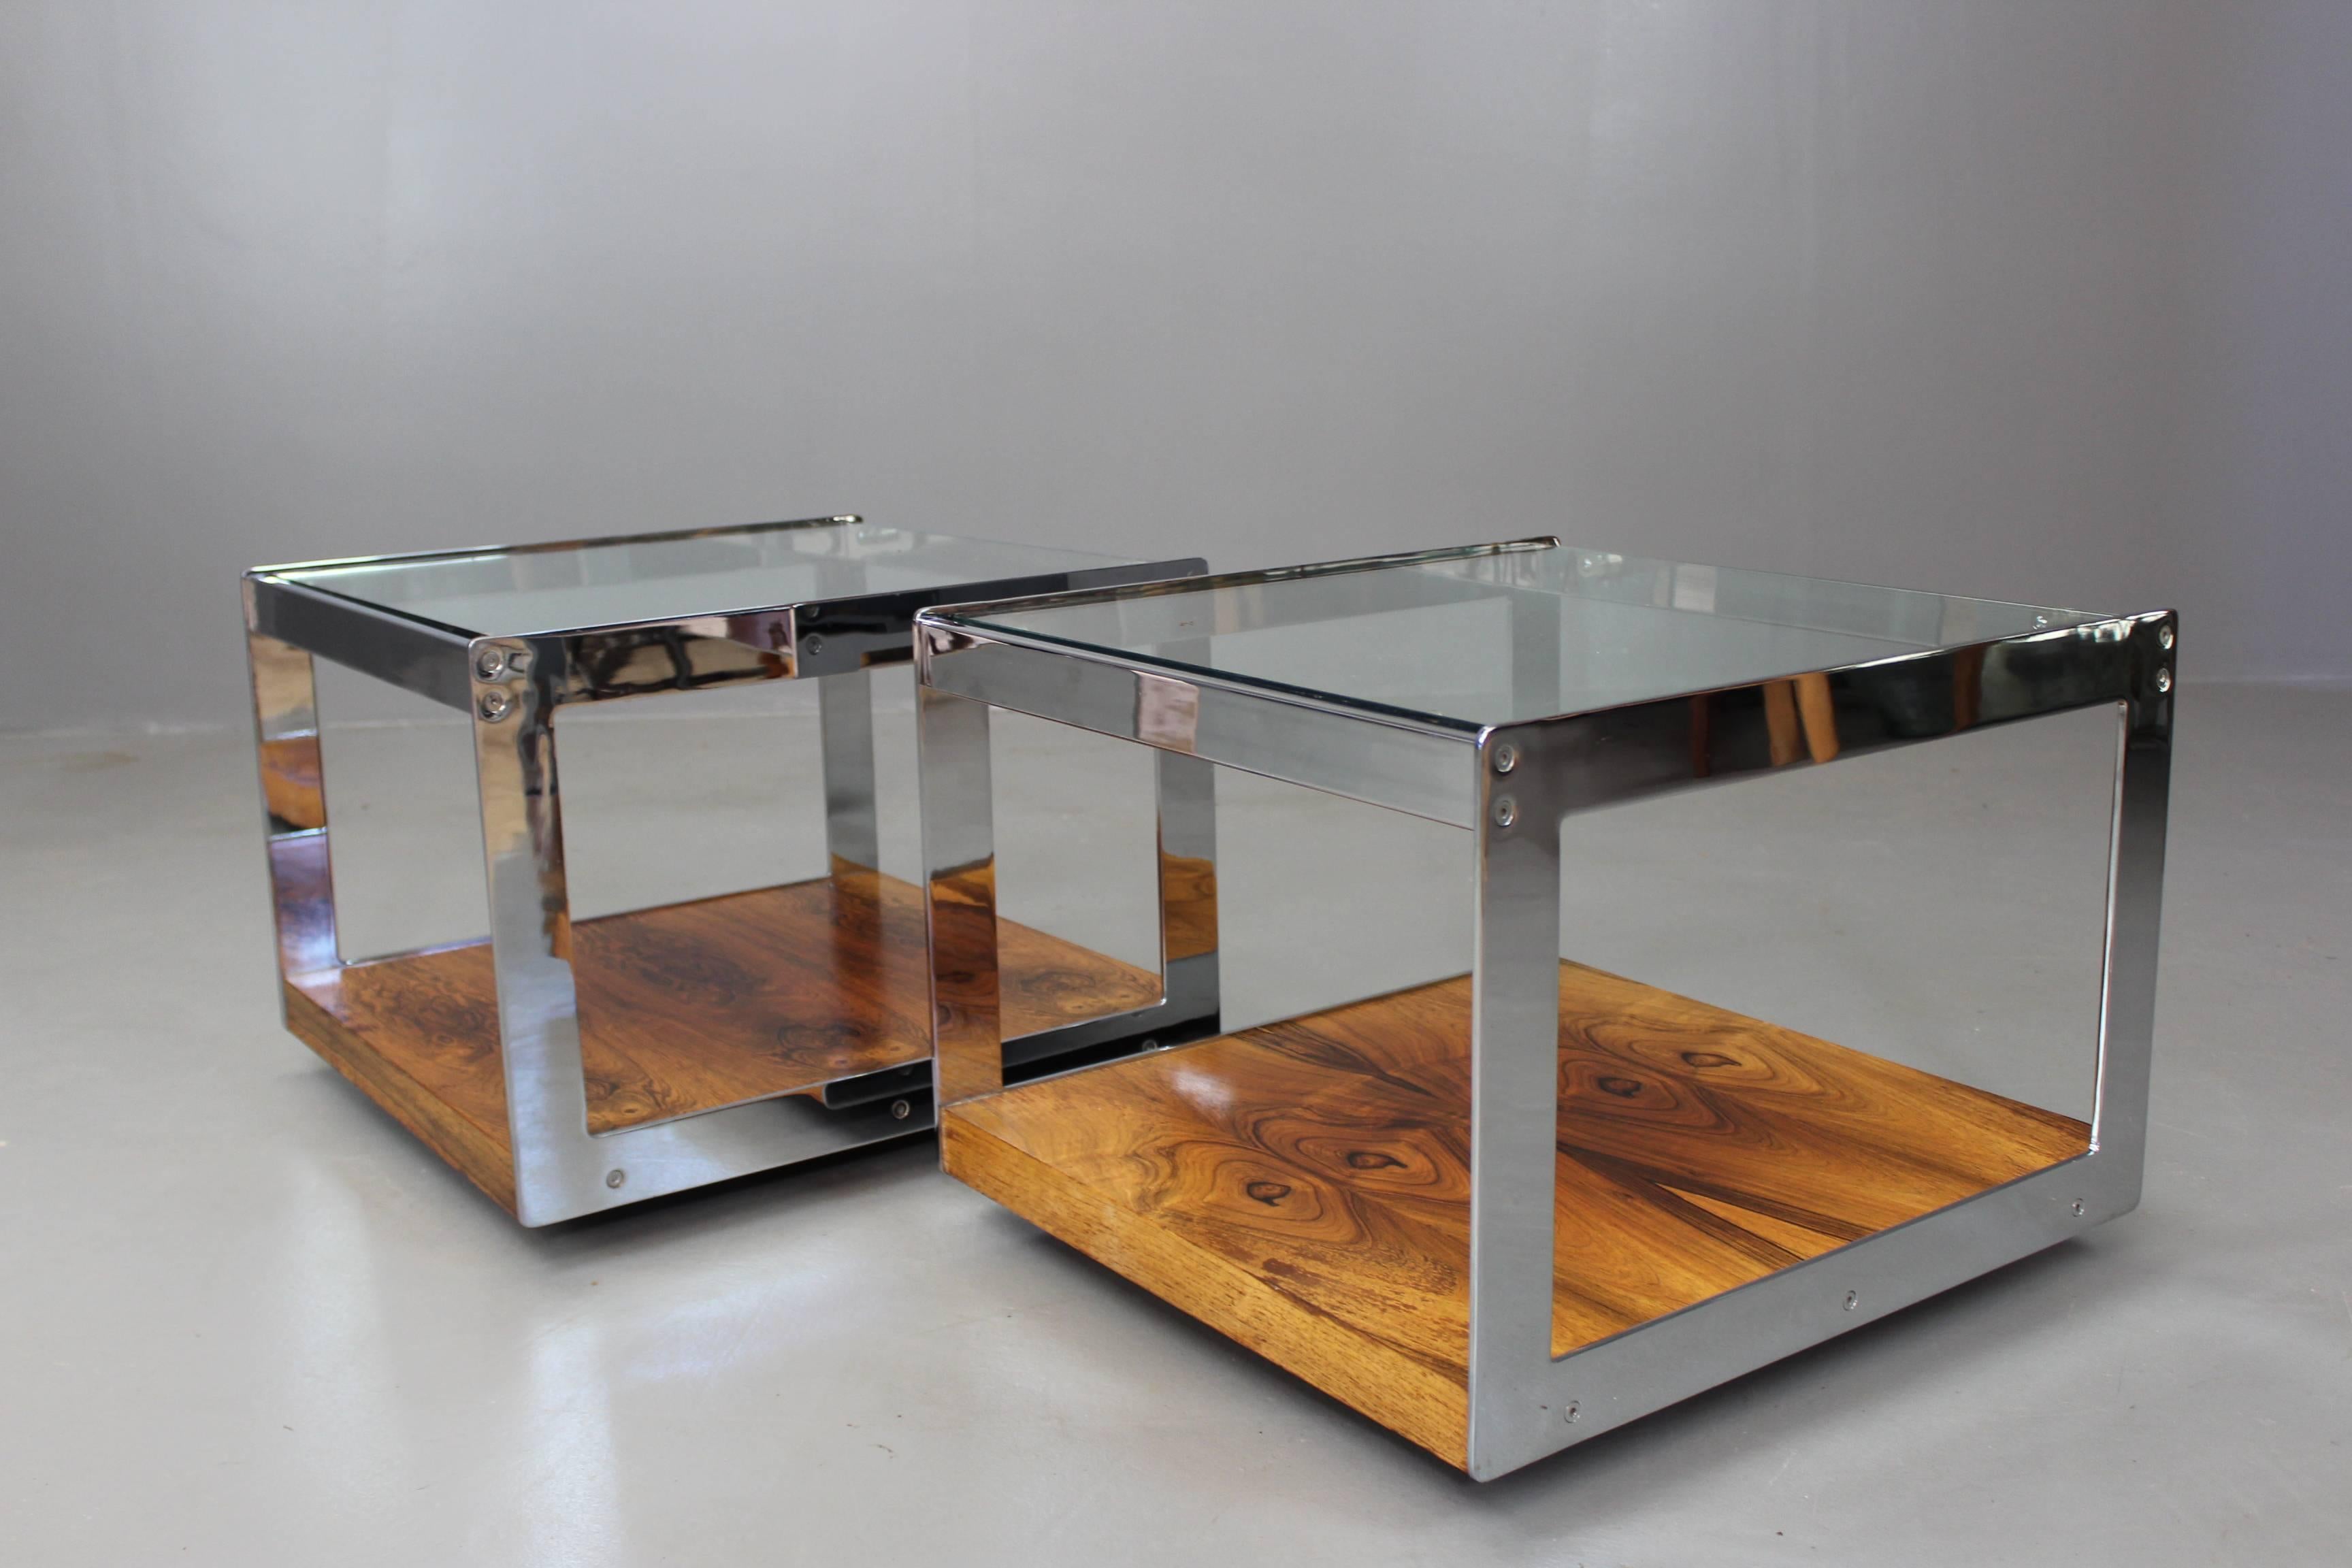 Lovely pair of Merrow Associates coffee tables. Pair of quality retro tables, designed by Richard Young, chrome-plated square frame with rosewood veneer lower tier and drop in thick glass top on castors.

The combination of rosewood, chrome and